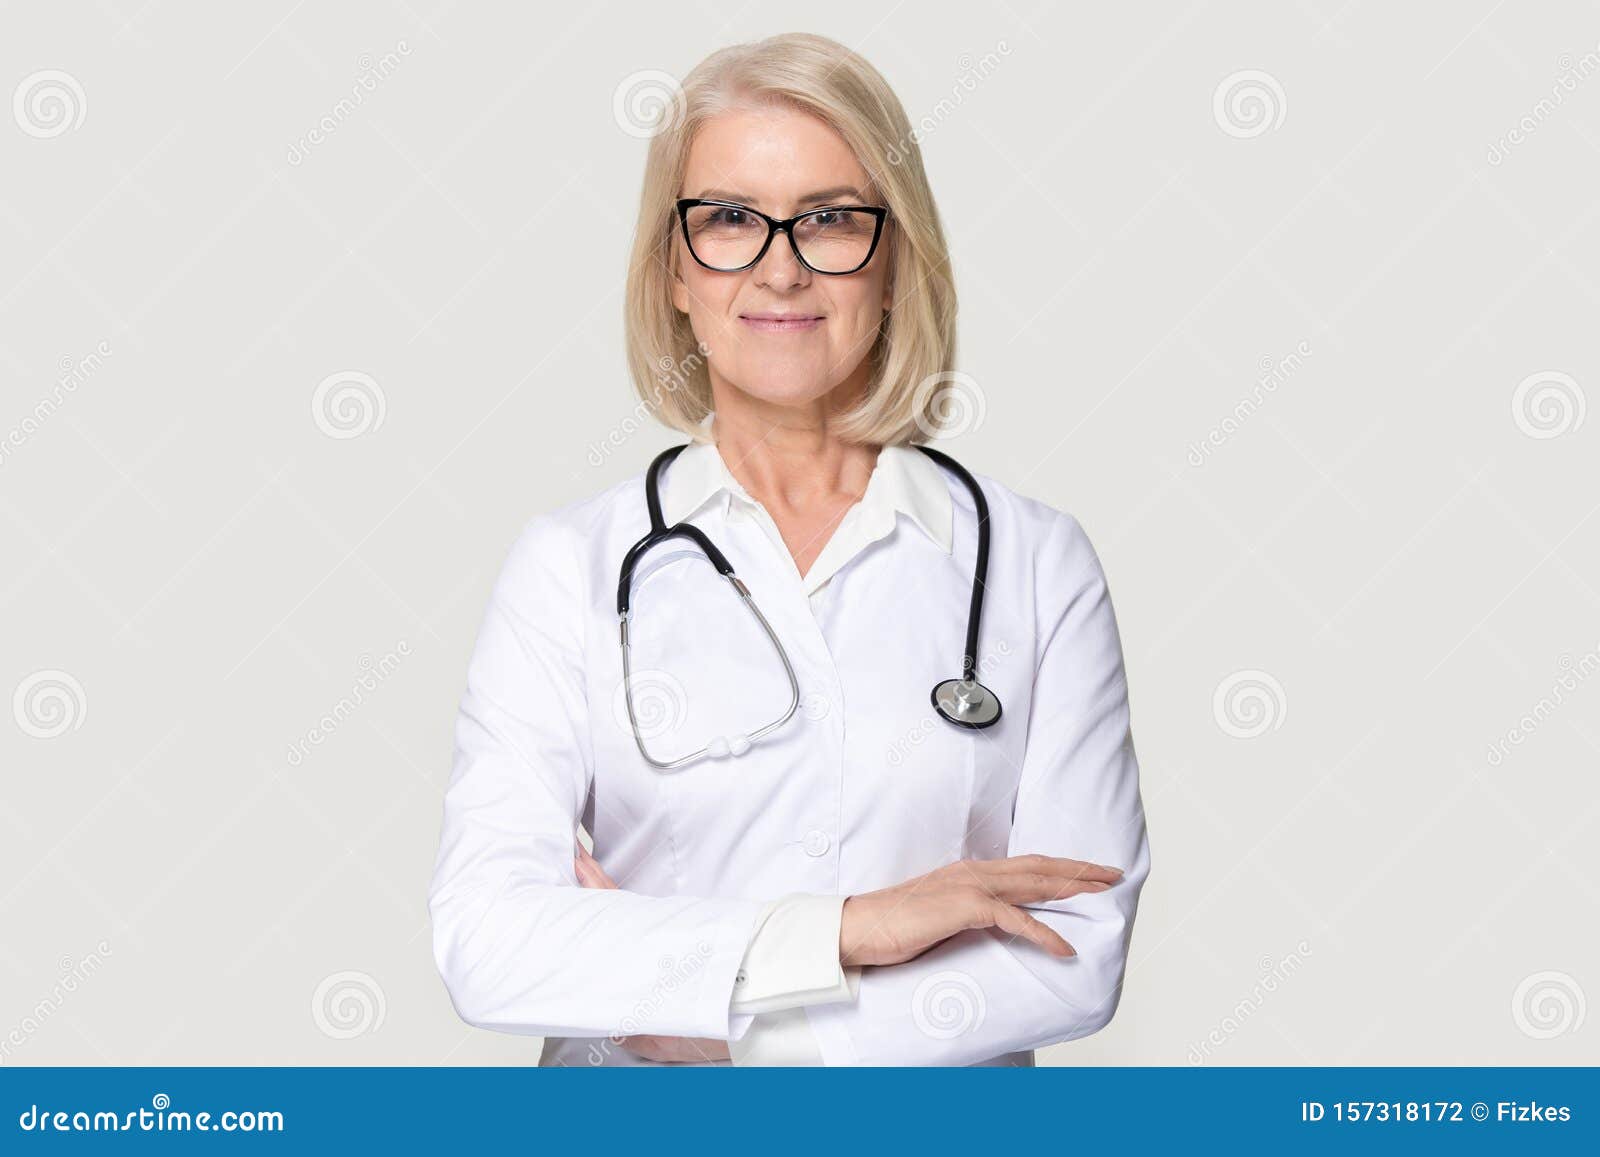 portrait of mature female doctor  on grey background